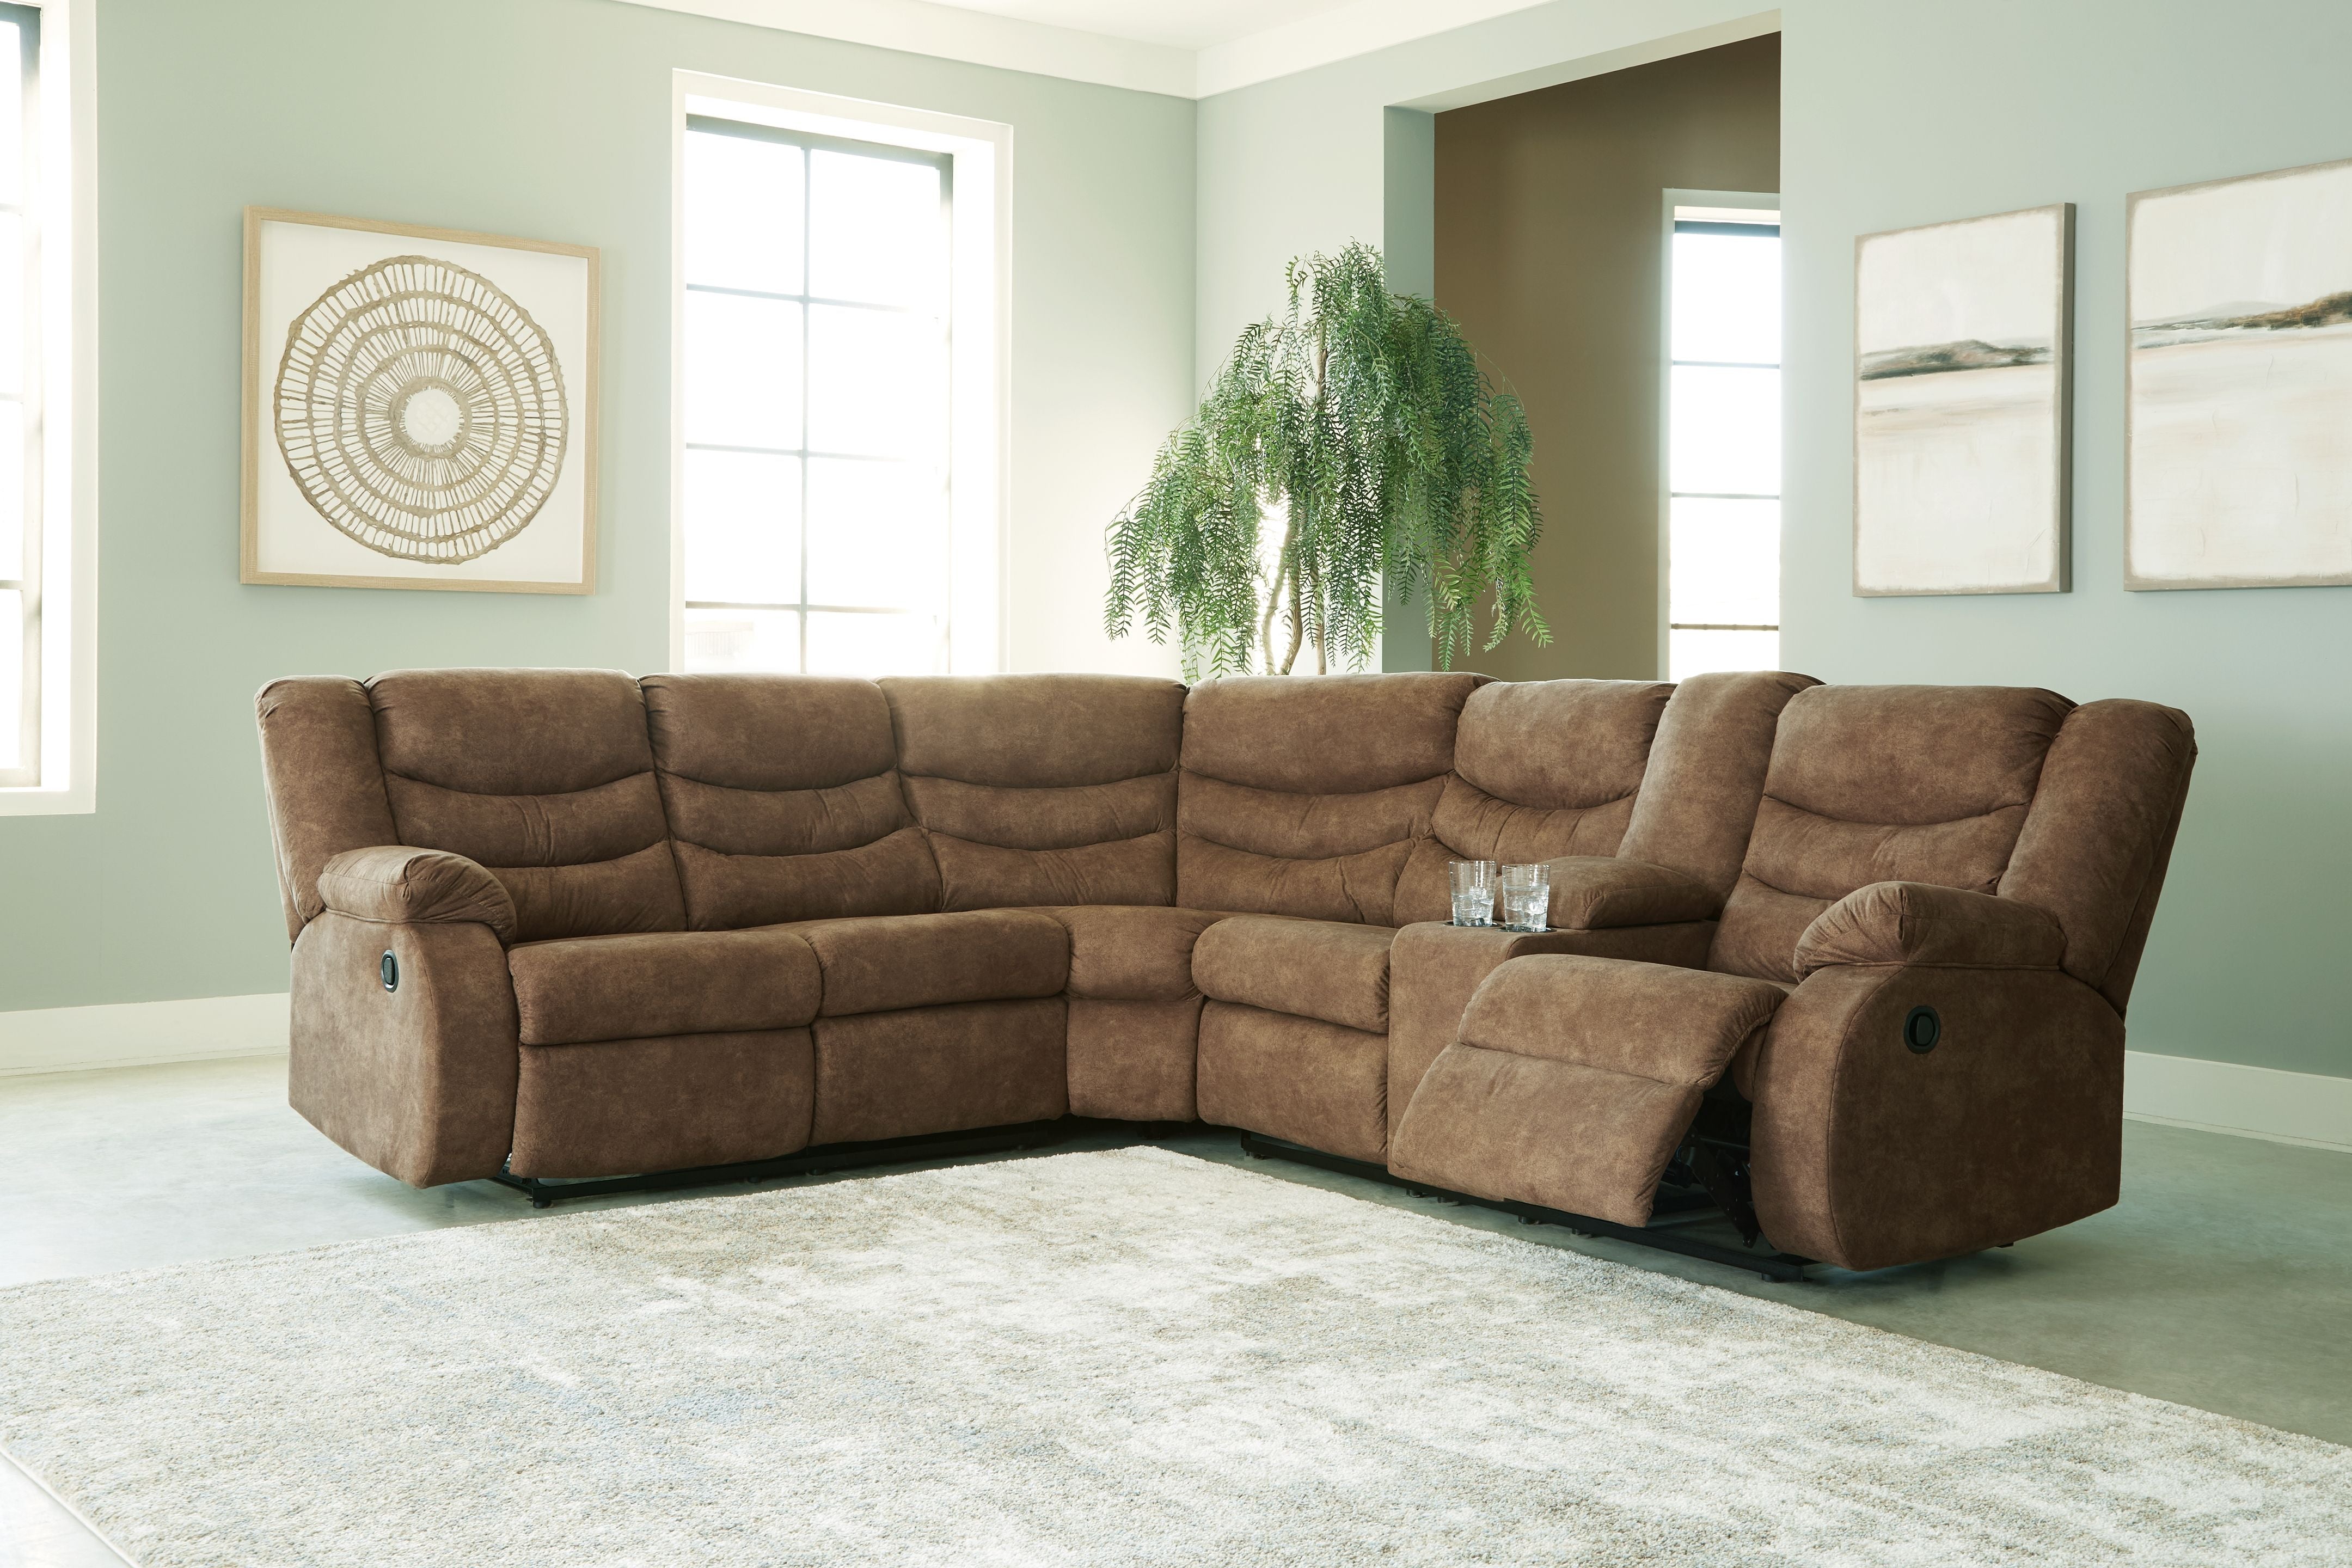 Partymate Faux Leather Reclining Sectional-Reclining Sectionals-American Furniture Outlet